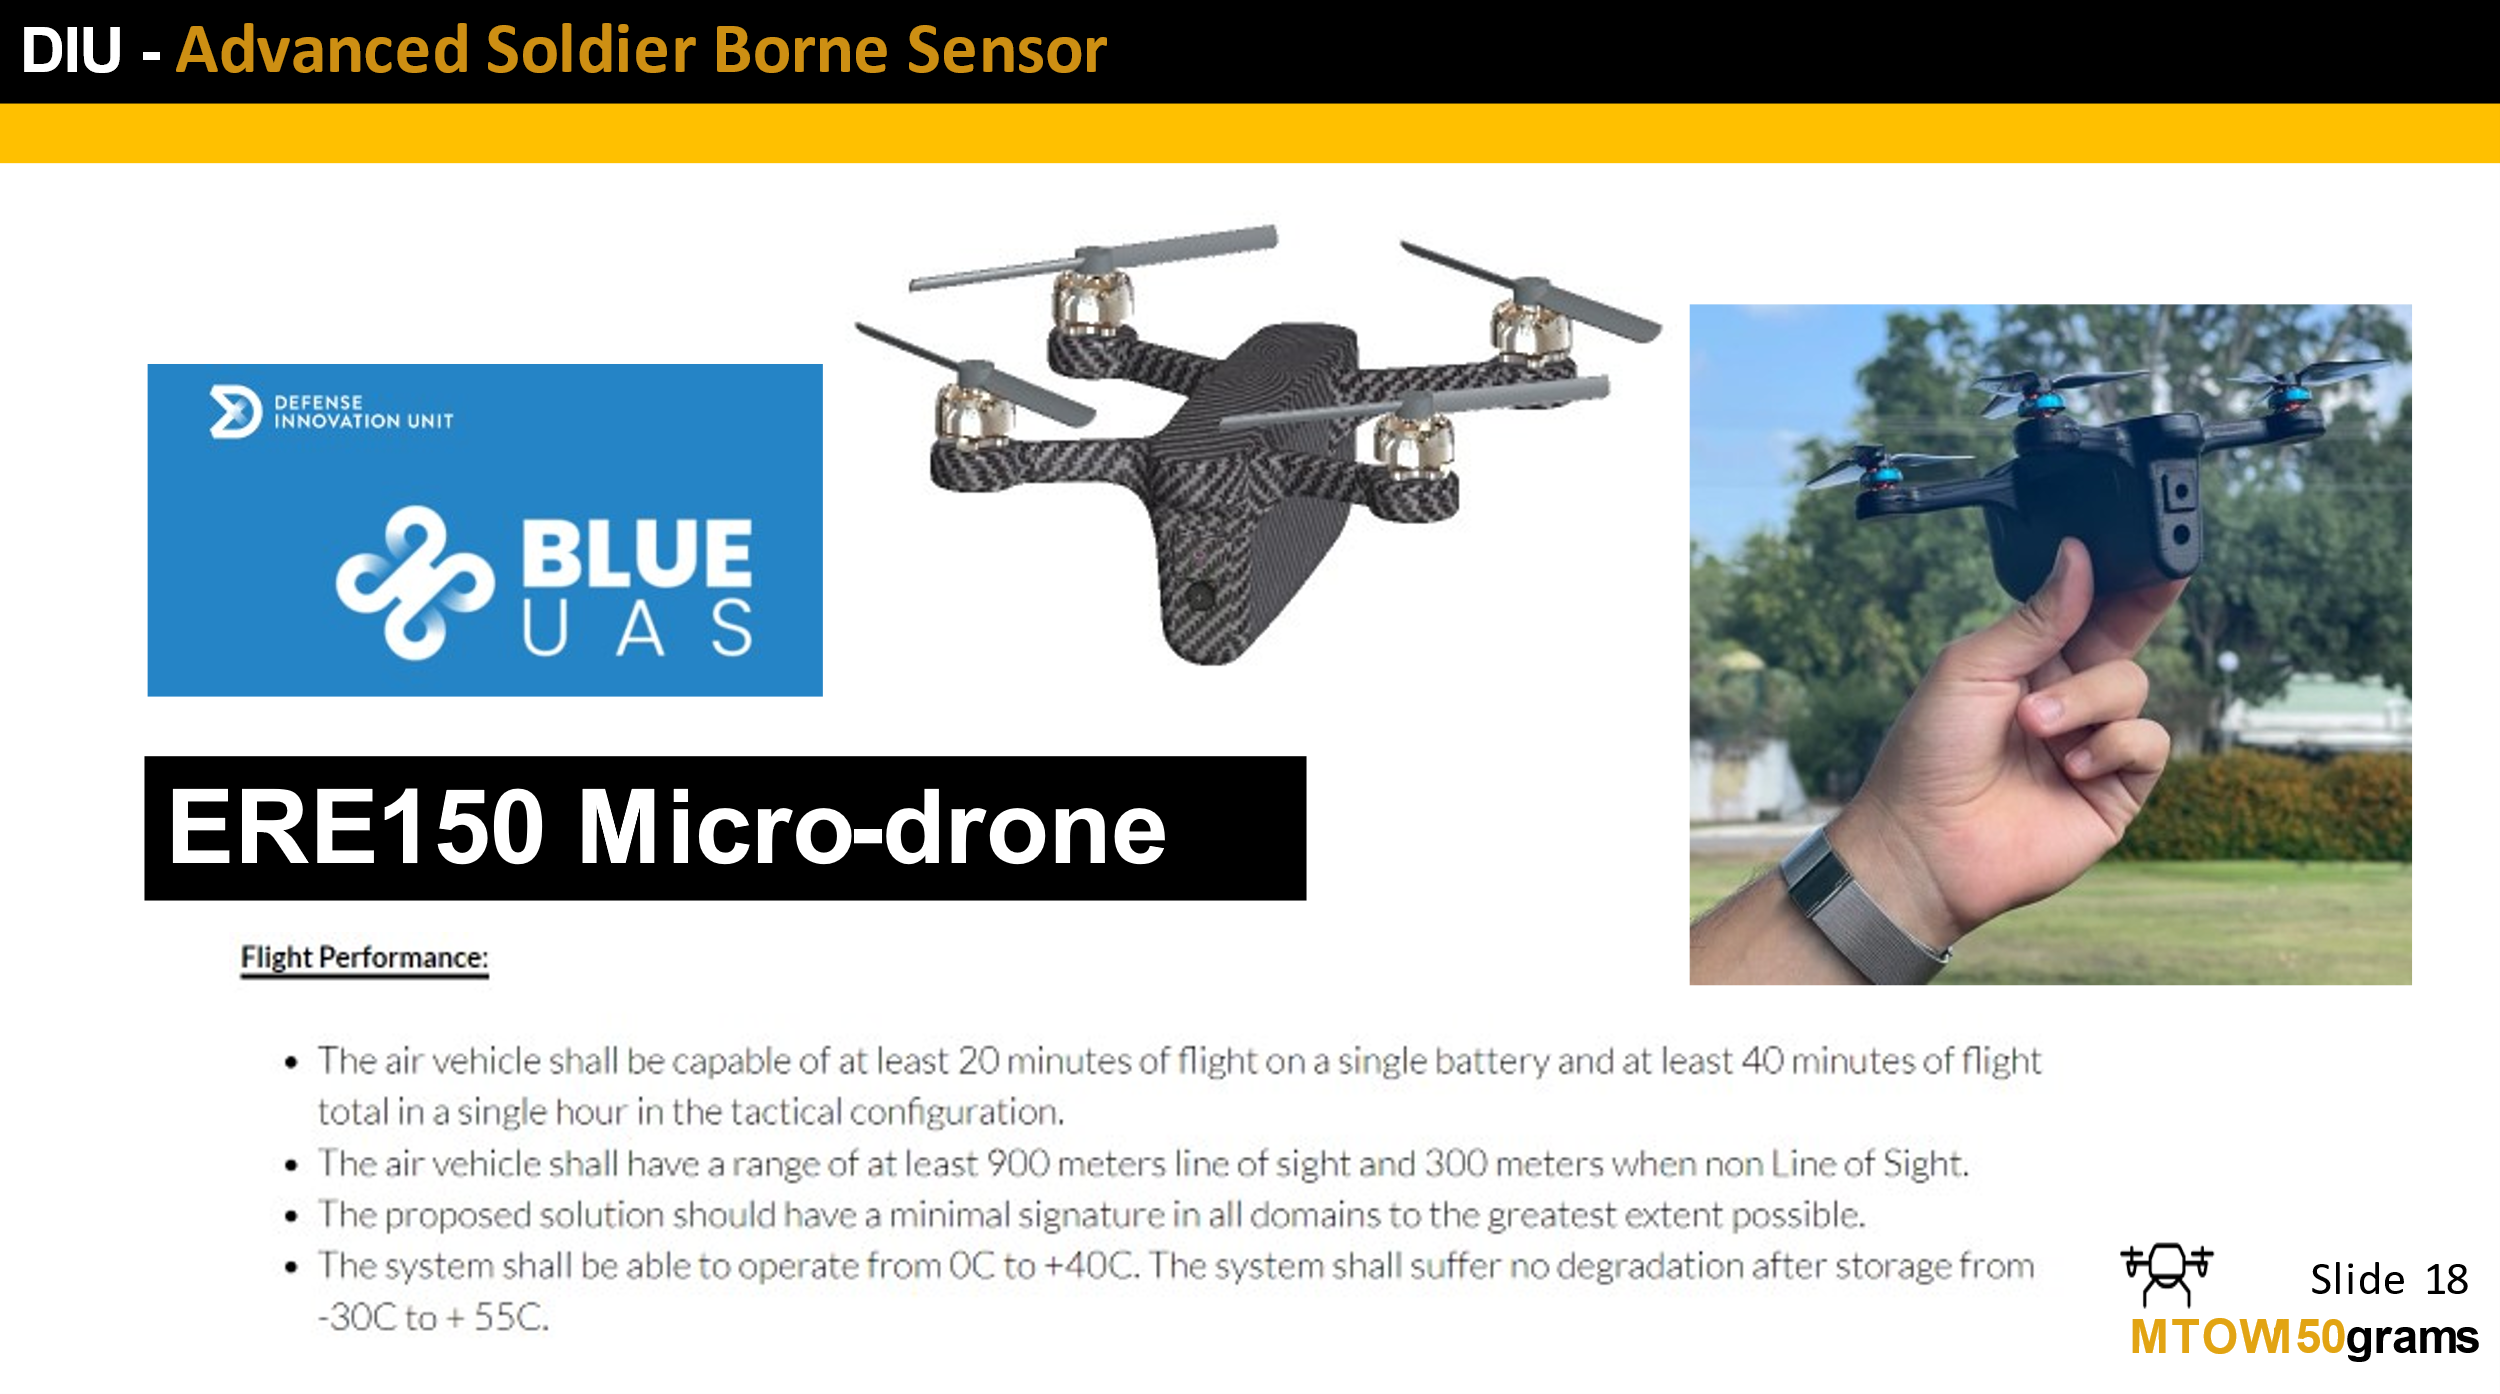 CopterPIX passed phase 1 DIU submission of Advanced Soldier Borne Sensor CSO